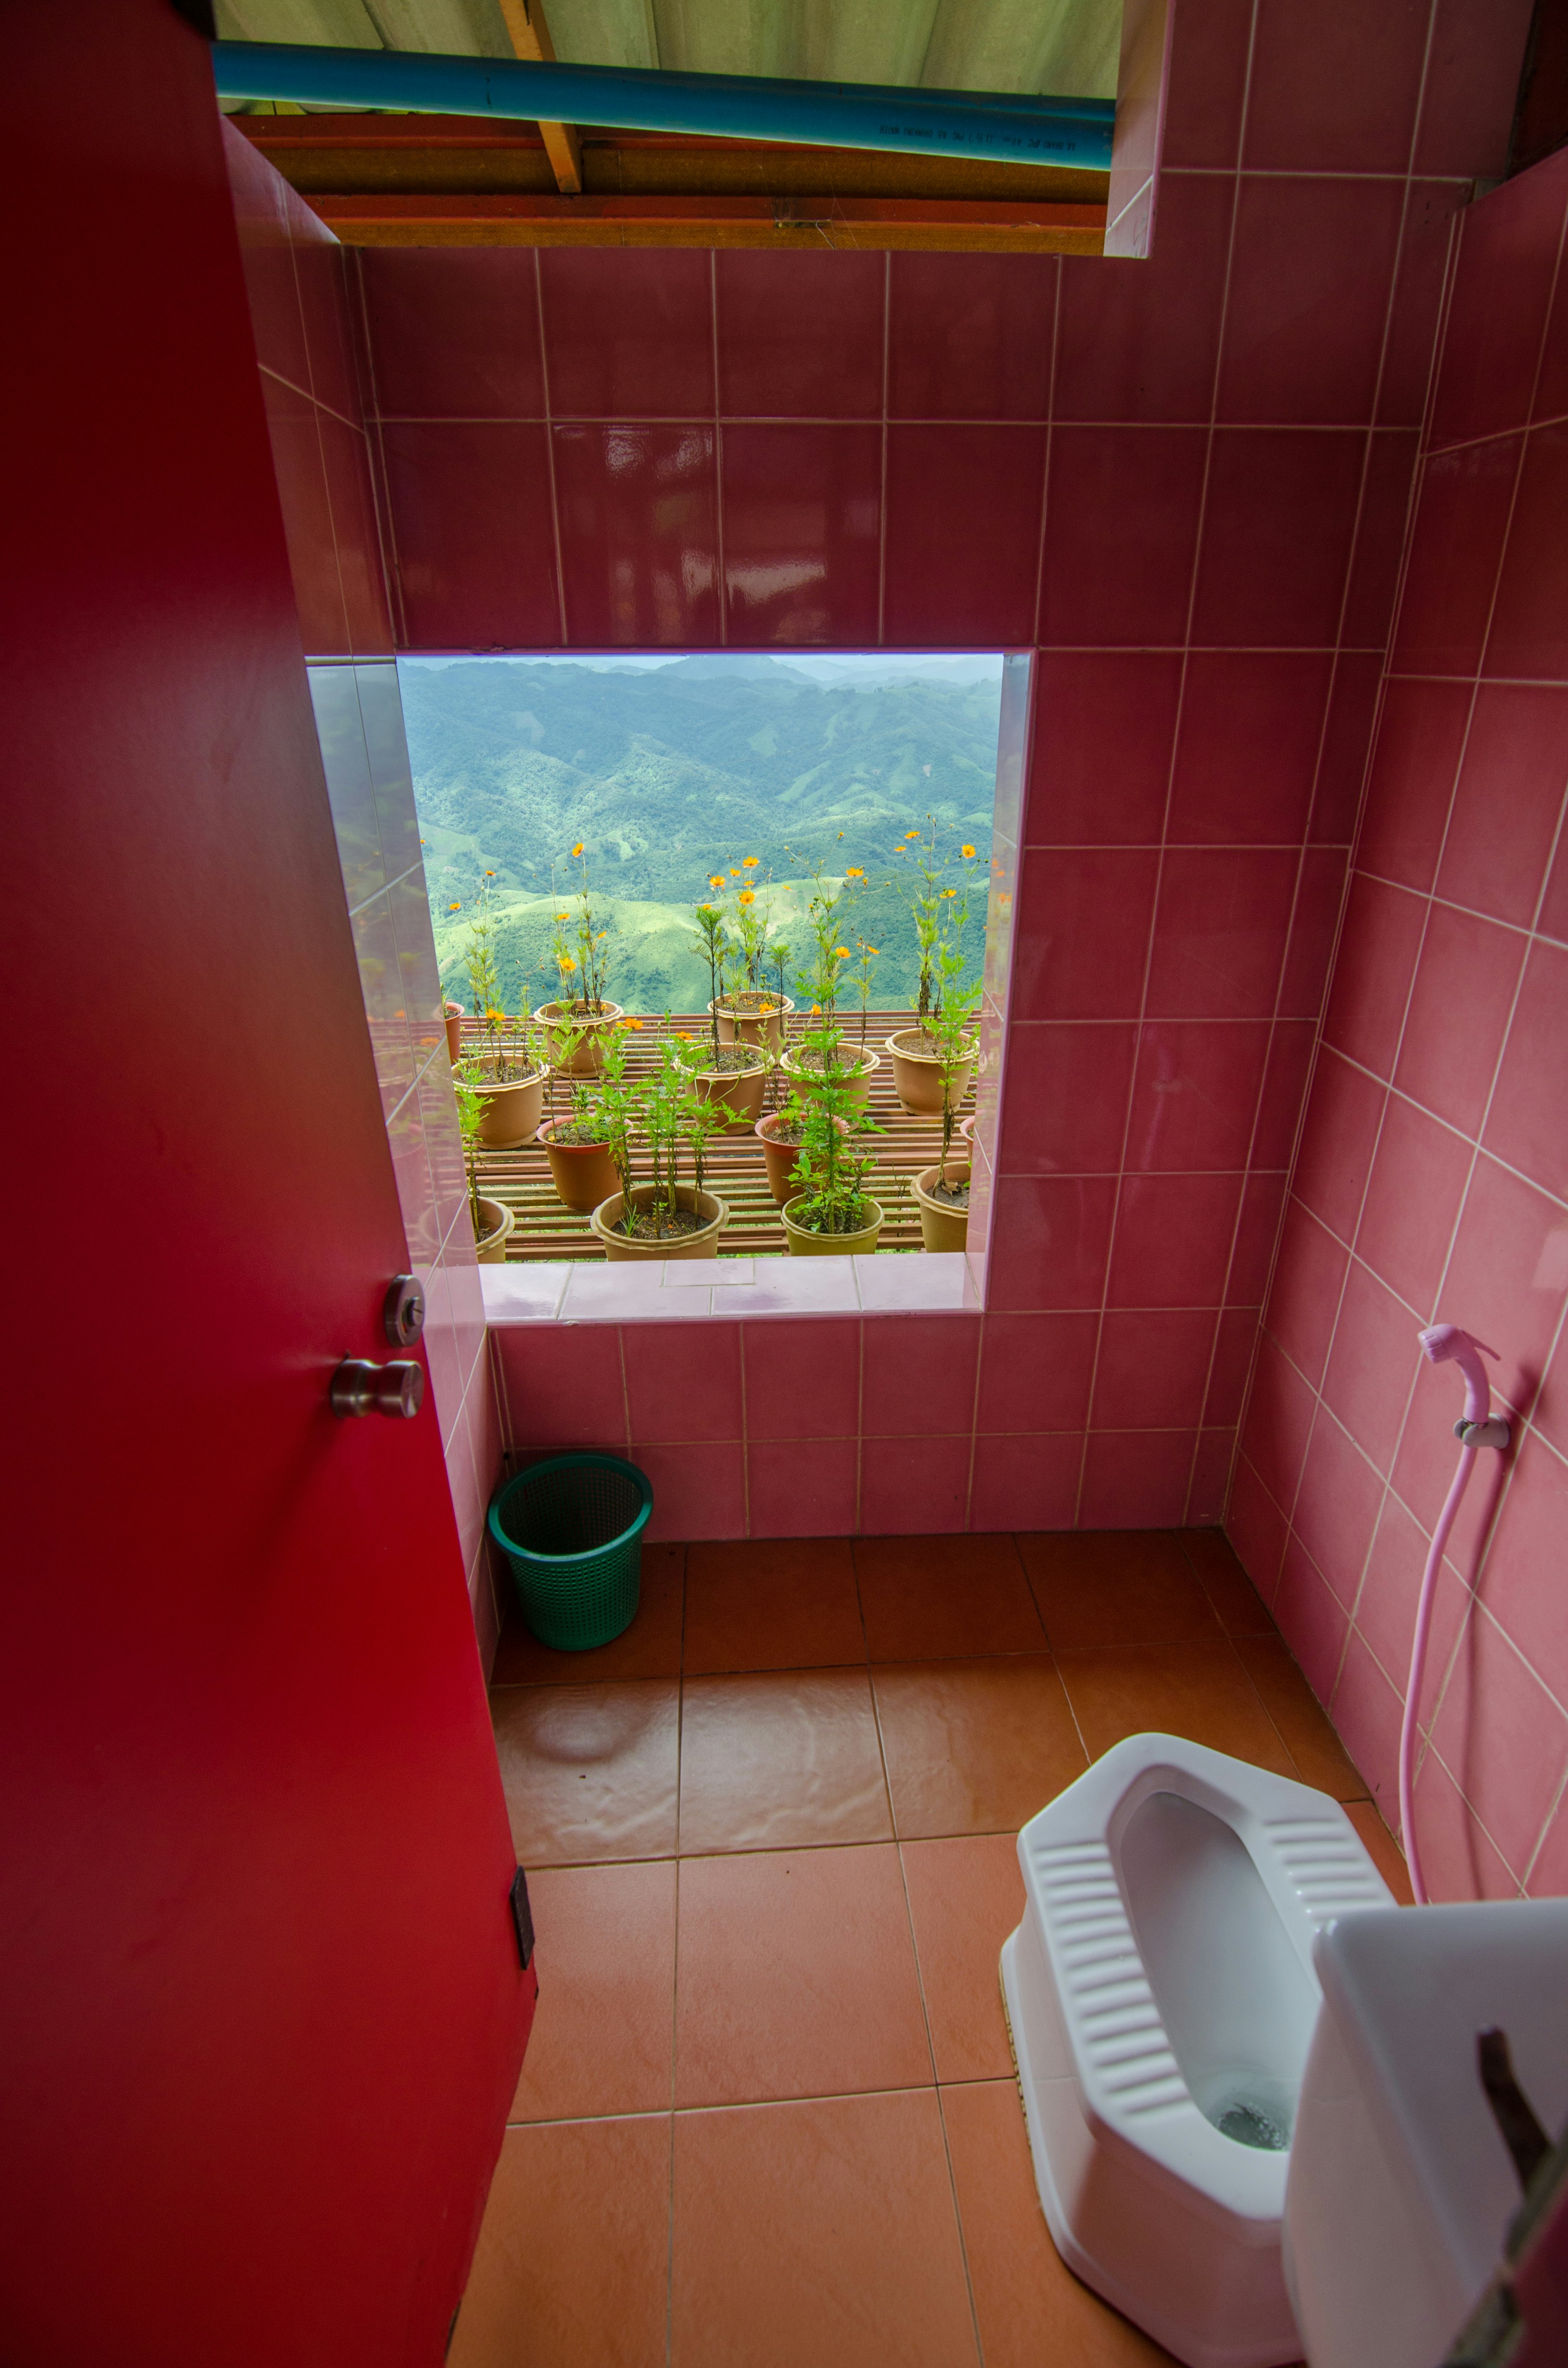 A toilet with a window overlooking a nice landscape